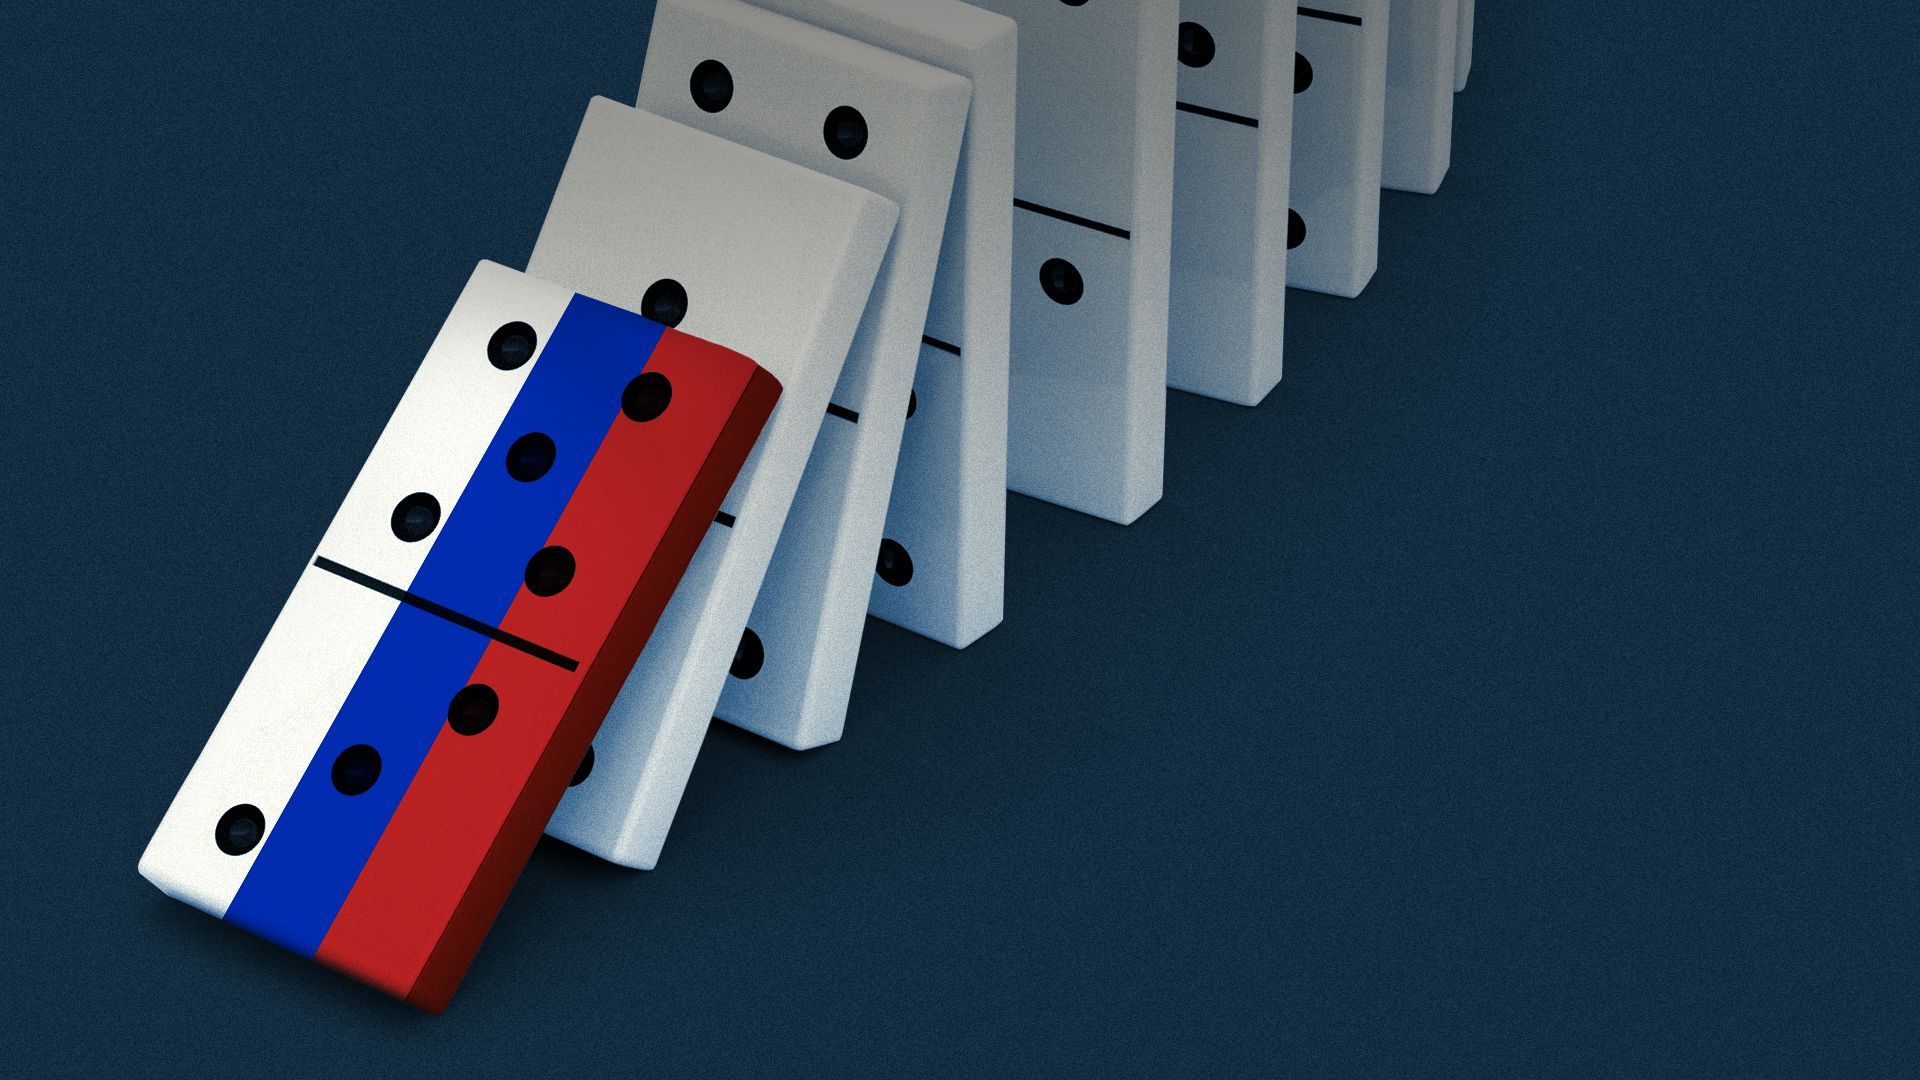 Illustration of a domino with the Russian flag starting to topple a line of dominoes.